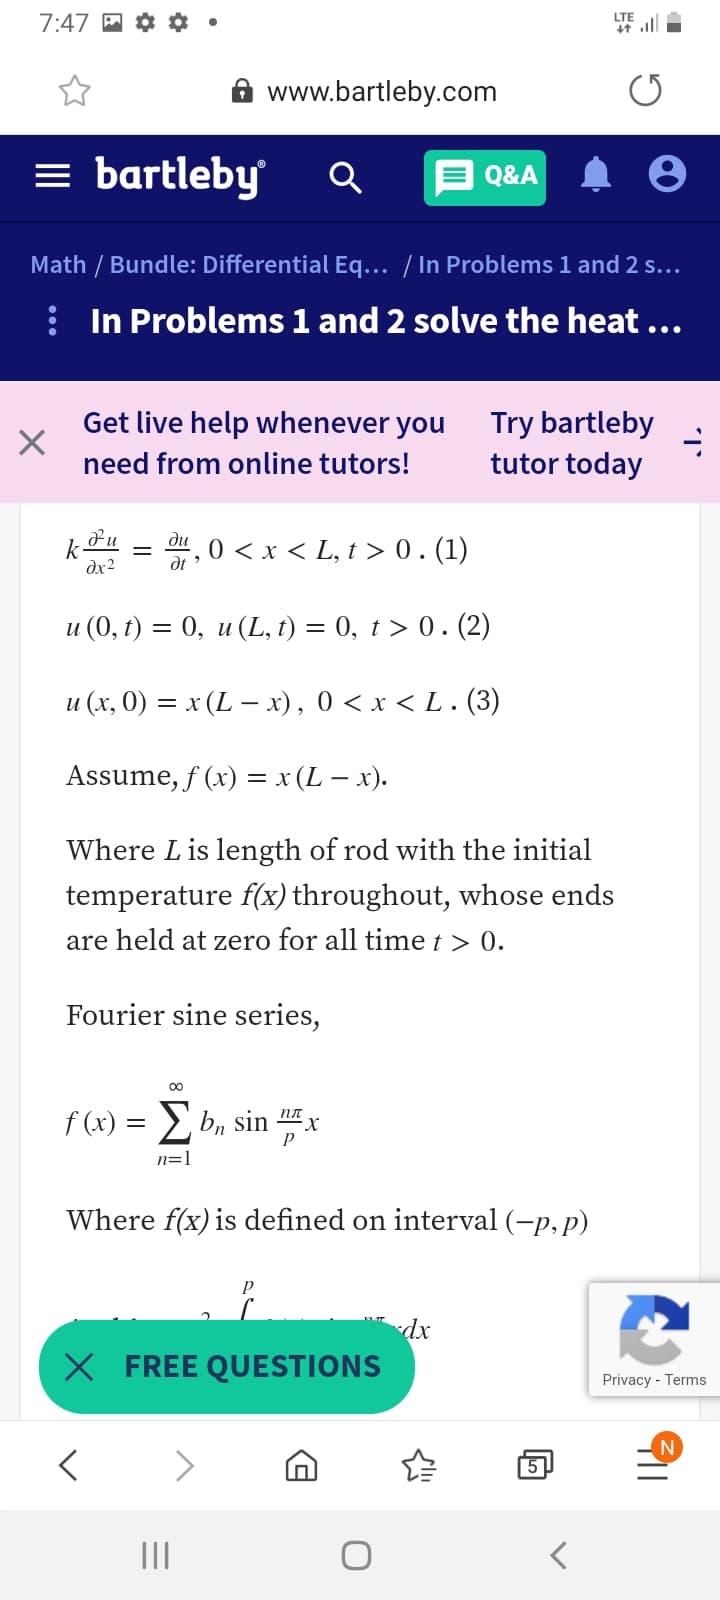 7:47
LTE
A www.bartleby.com
= bartleby
E Q&A
Math / Bundle: Differential Eq... / In Problems 1 and 2 s...
: In Problems 1 and 2 solve the heat ...
Get live help whenever you
Try bartleby
tutor today
need from online tutors!
r, 0 <x < L, t > 0. (1)
ди
k
dx2
и (0, г) %3D 0, и (L, I) — 0, t> 0. (2)
и (х, 0) — х (L— х), 0 <x<L (3)
%D
Assume, f (x) = x (L – x).
Where Lis length of rod with the initial
temperature f(x) throughout, whose ends
are held at zero for all time t > 0.
Fourier sine series,
00
f (x) = bn sin x
пл
n=1
Where f(x) is defined on interval (-p, p)
dx
X FREE QUESTIONS
Privacy - Terms
N
5
